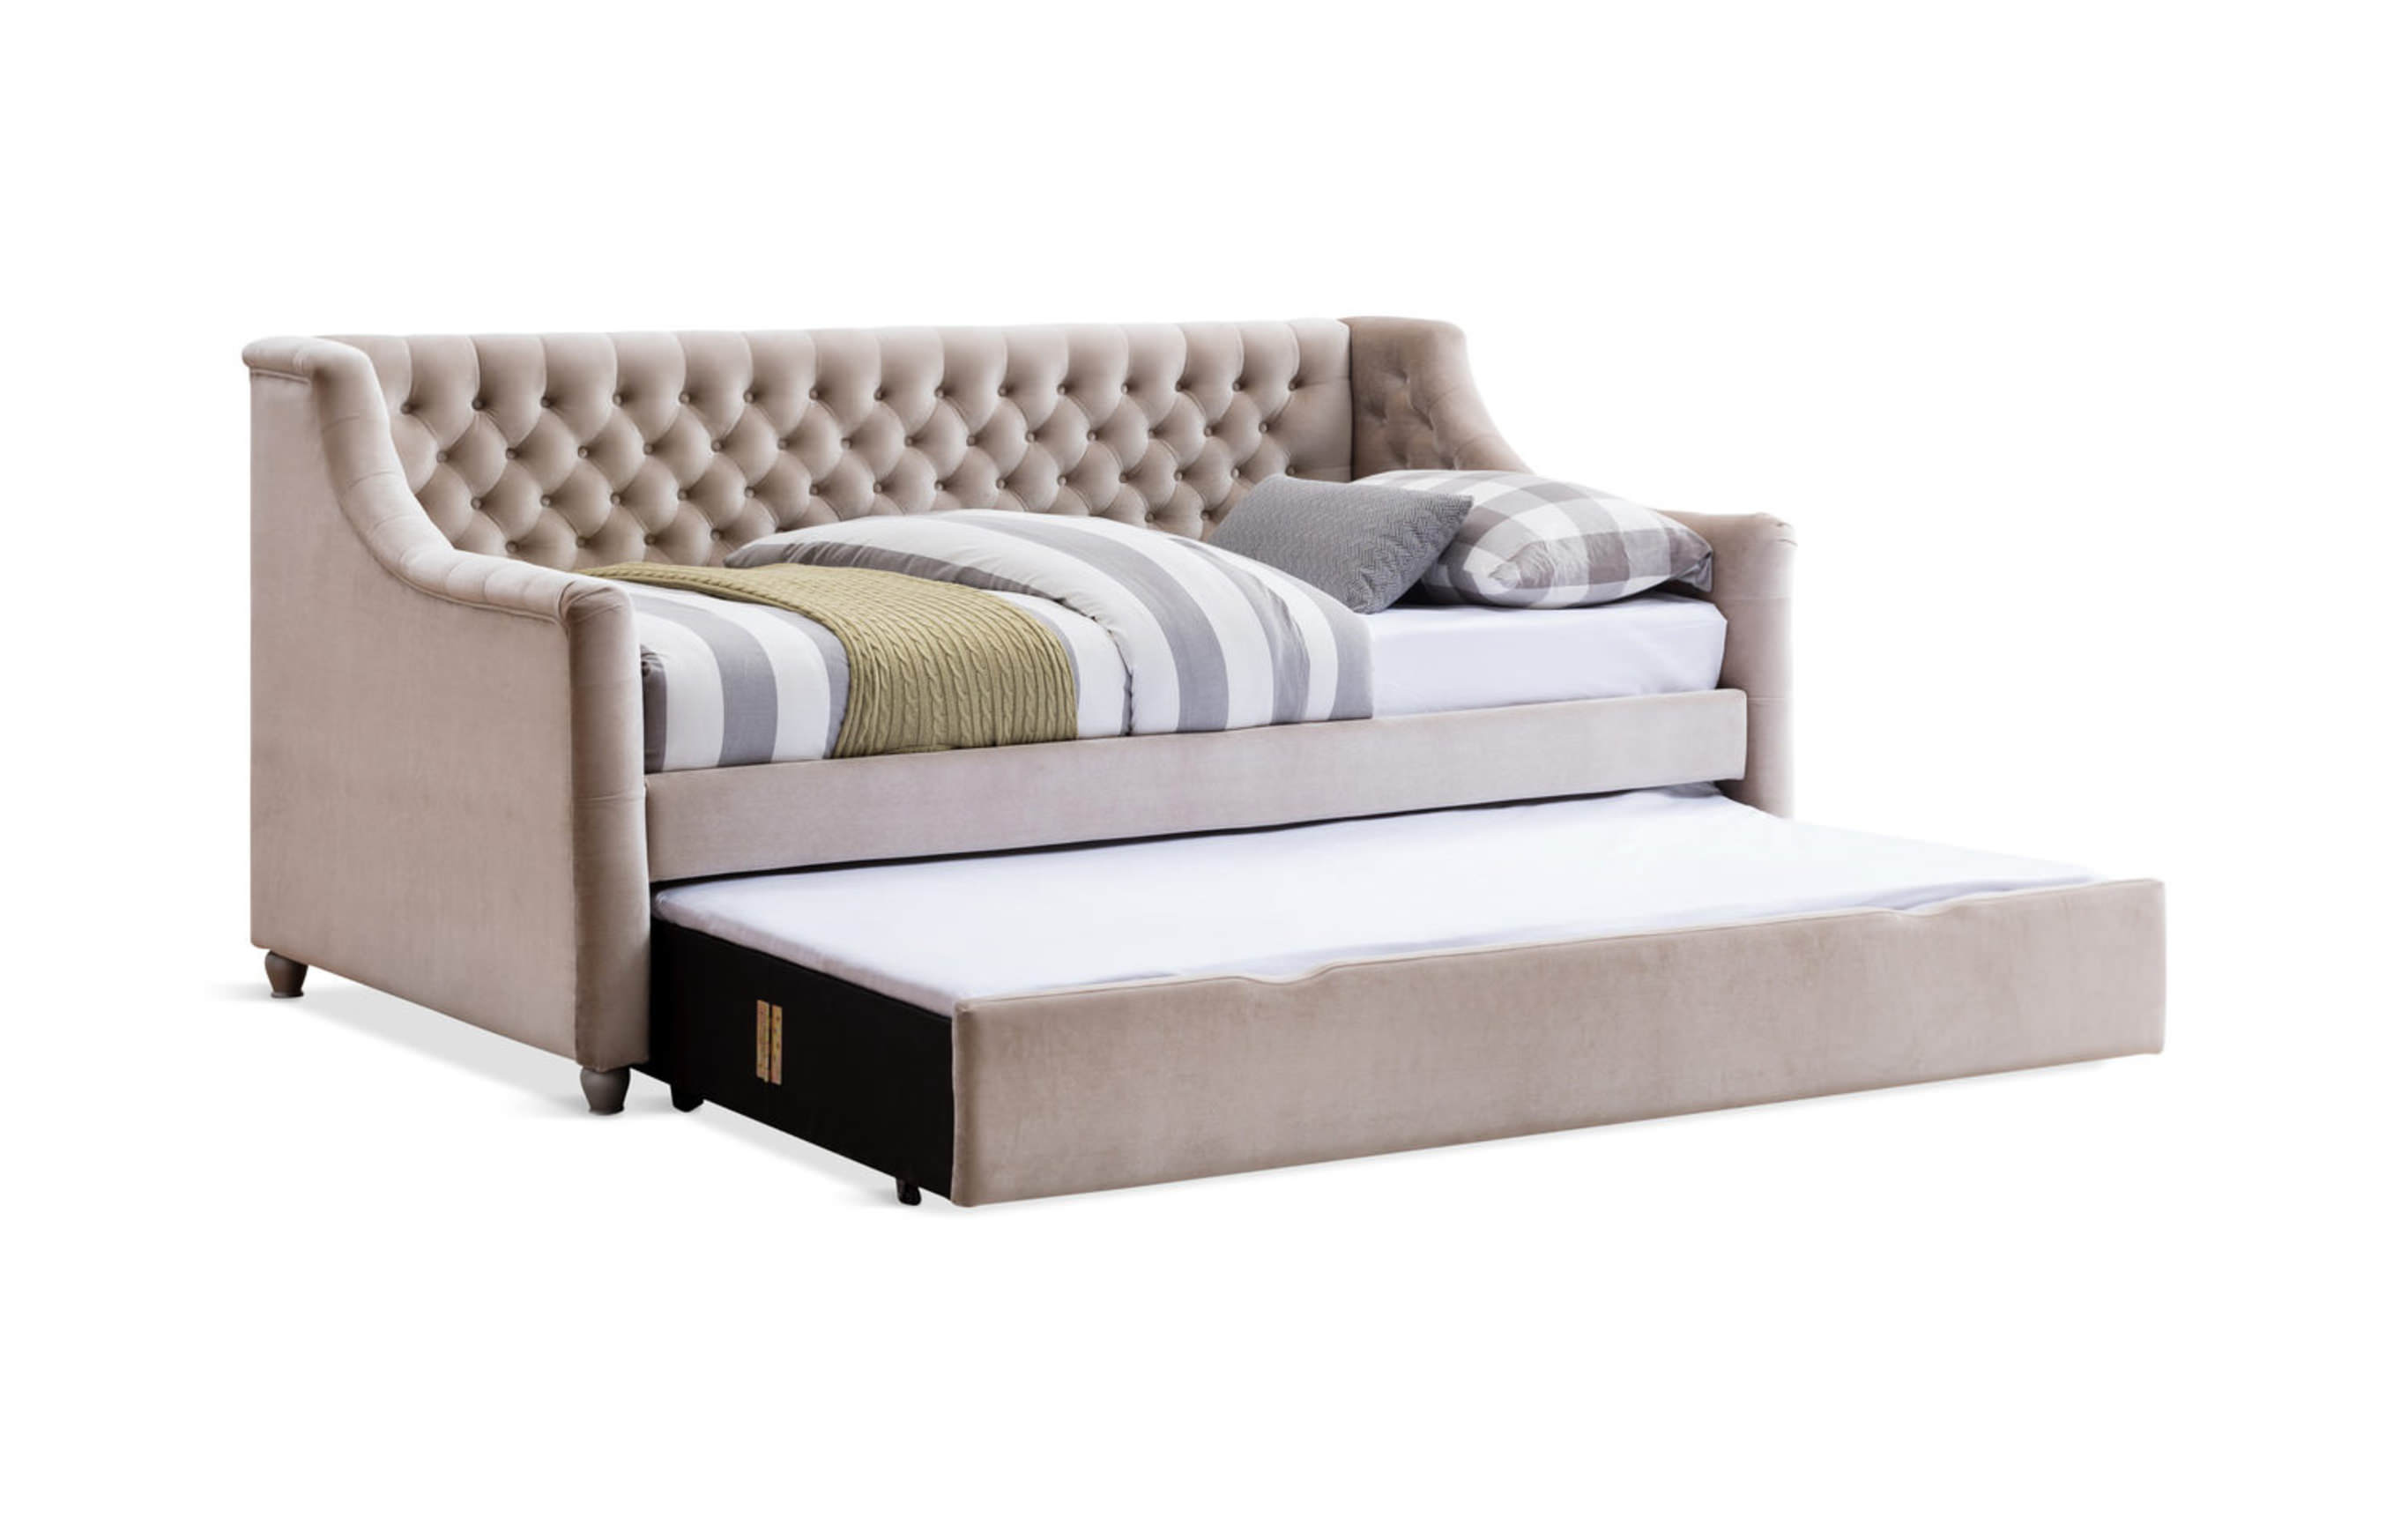 Roll Out the Trundle Beds - design blog by HOM Furniture